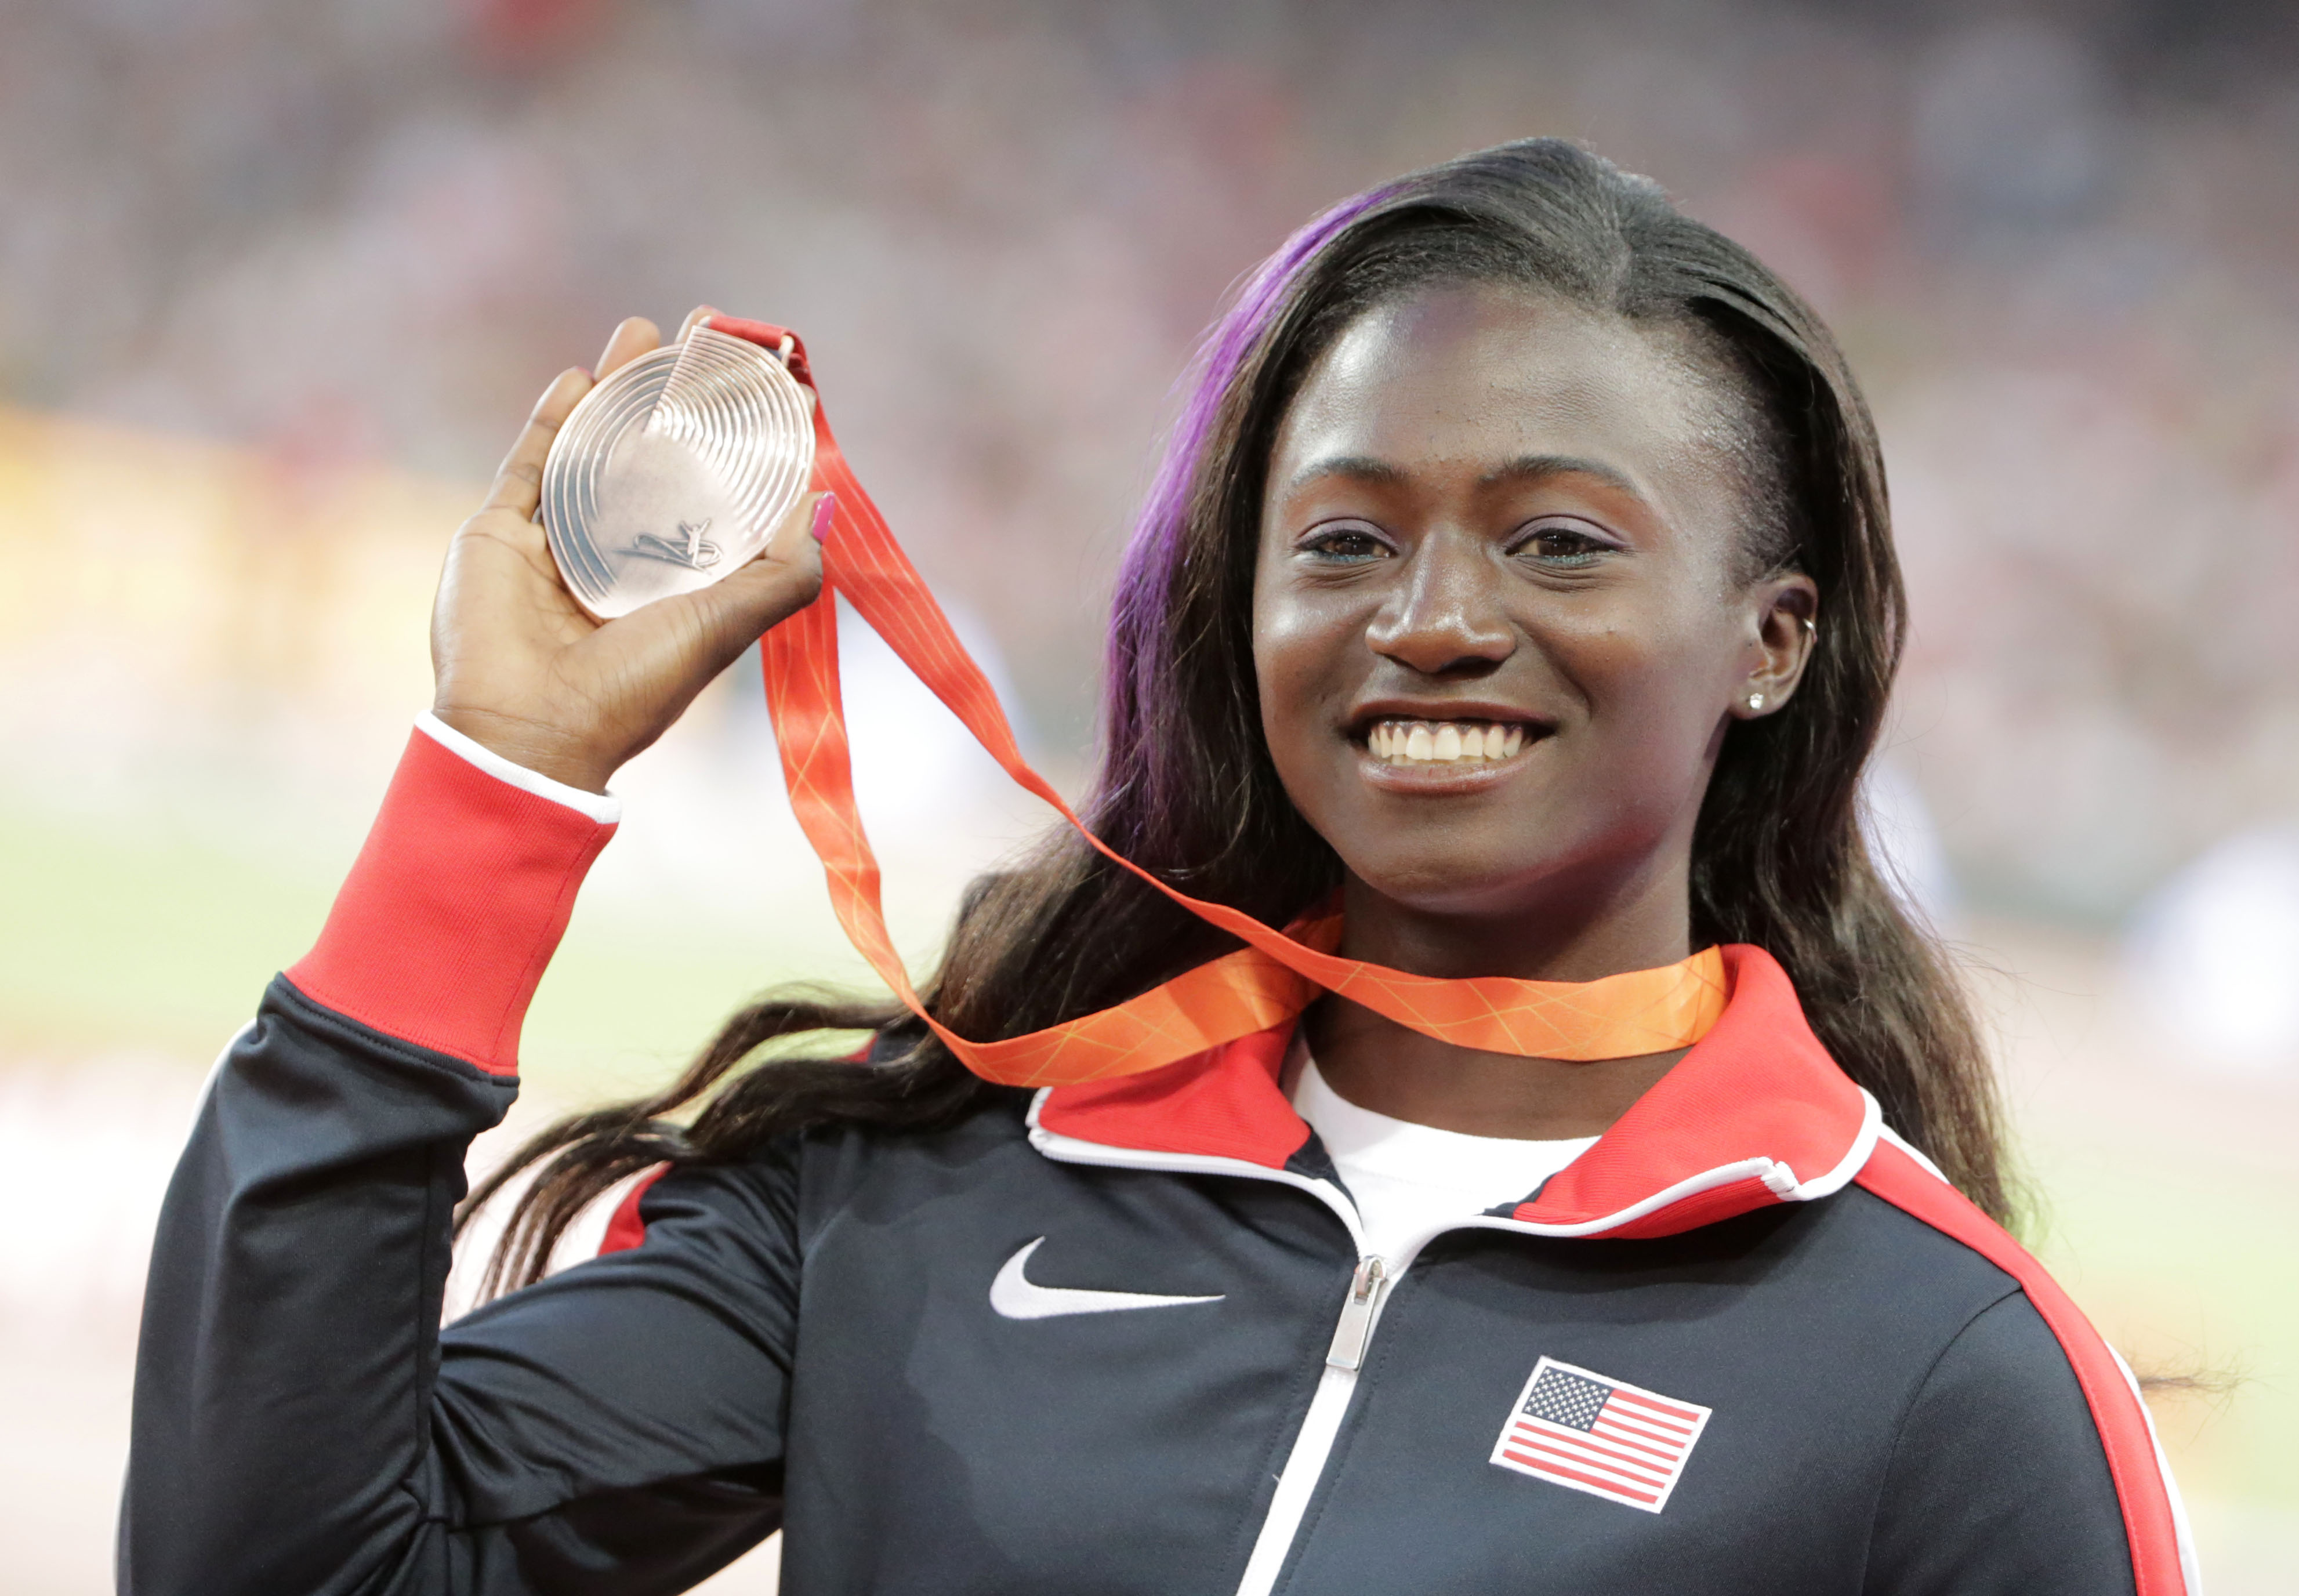 Tori Bowie of USA poses with her bronze medal on the podium during the medal ceremony of the women's 100m final during the Beijing 2015 IAAF World Championships at the National Stadium, also known as Bird's Nest, in Beijing, China, 25 August 2015. | Source: Getty Images